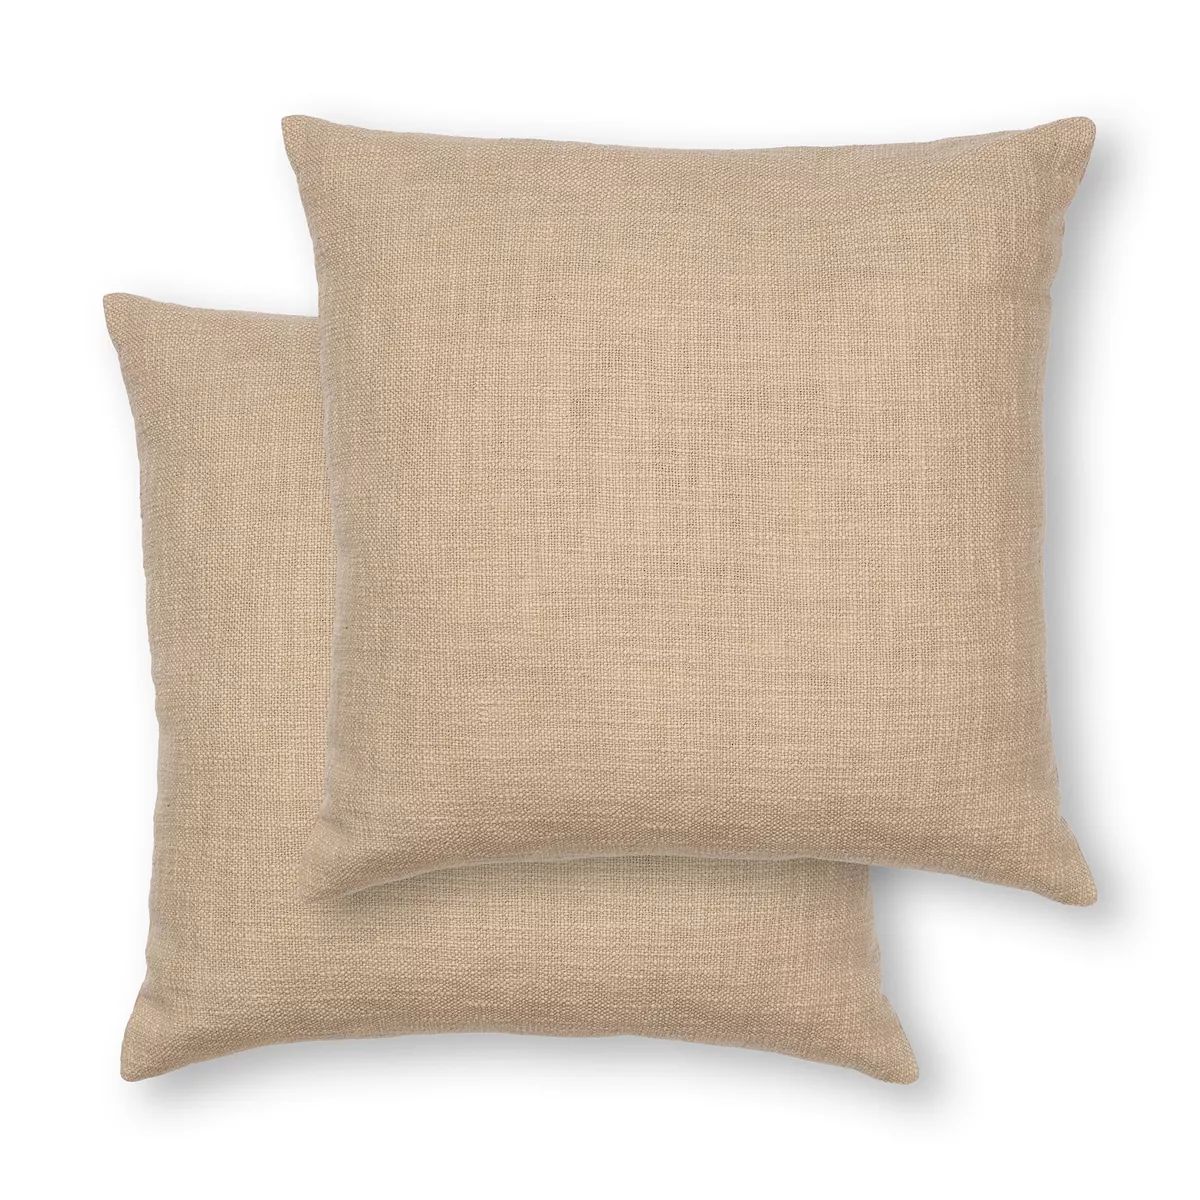 Sonoma Goods For Life® Textured 2-piece Solid 18" x 18" Throw Pillow Set | Kohl's